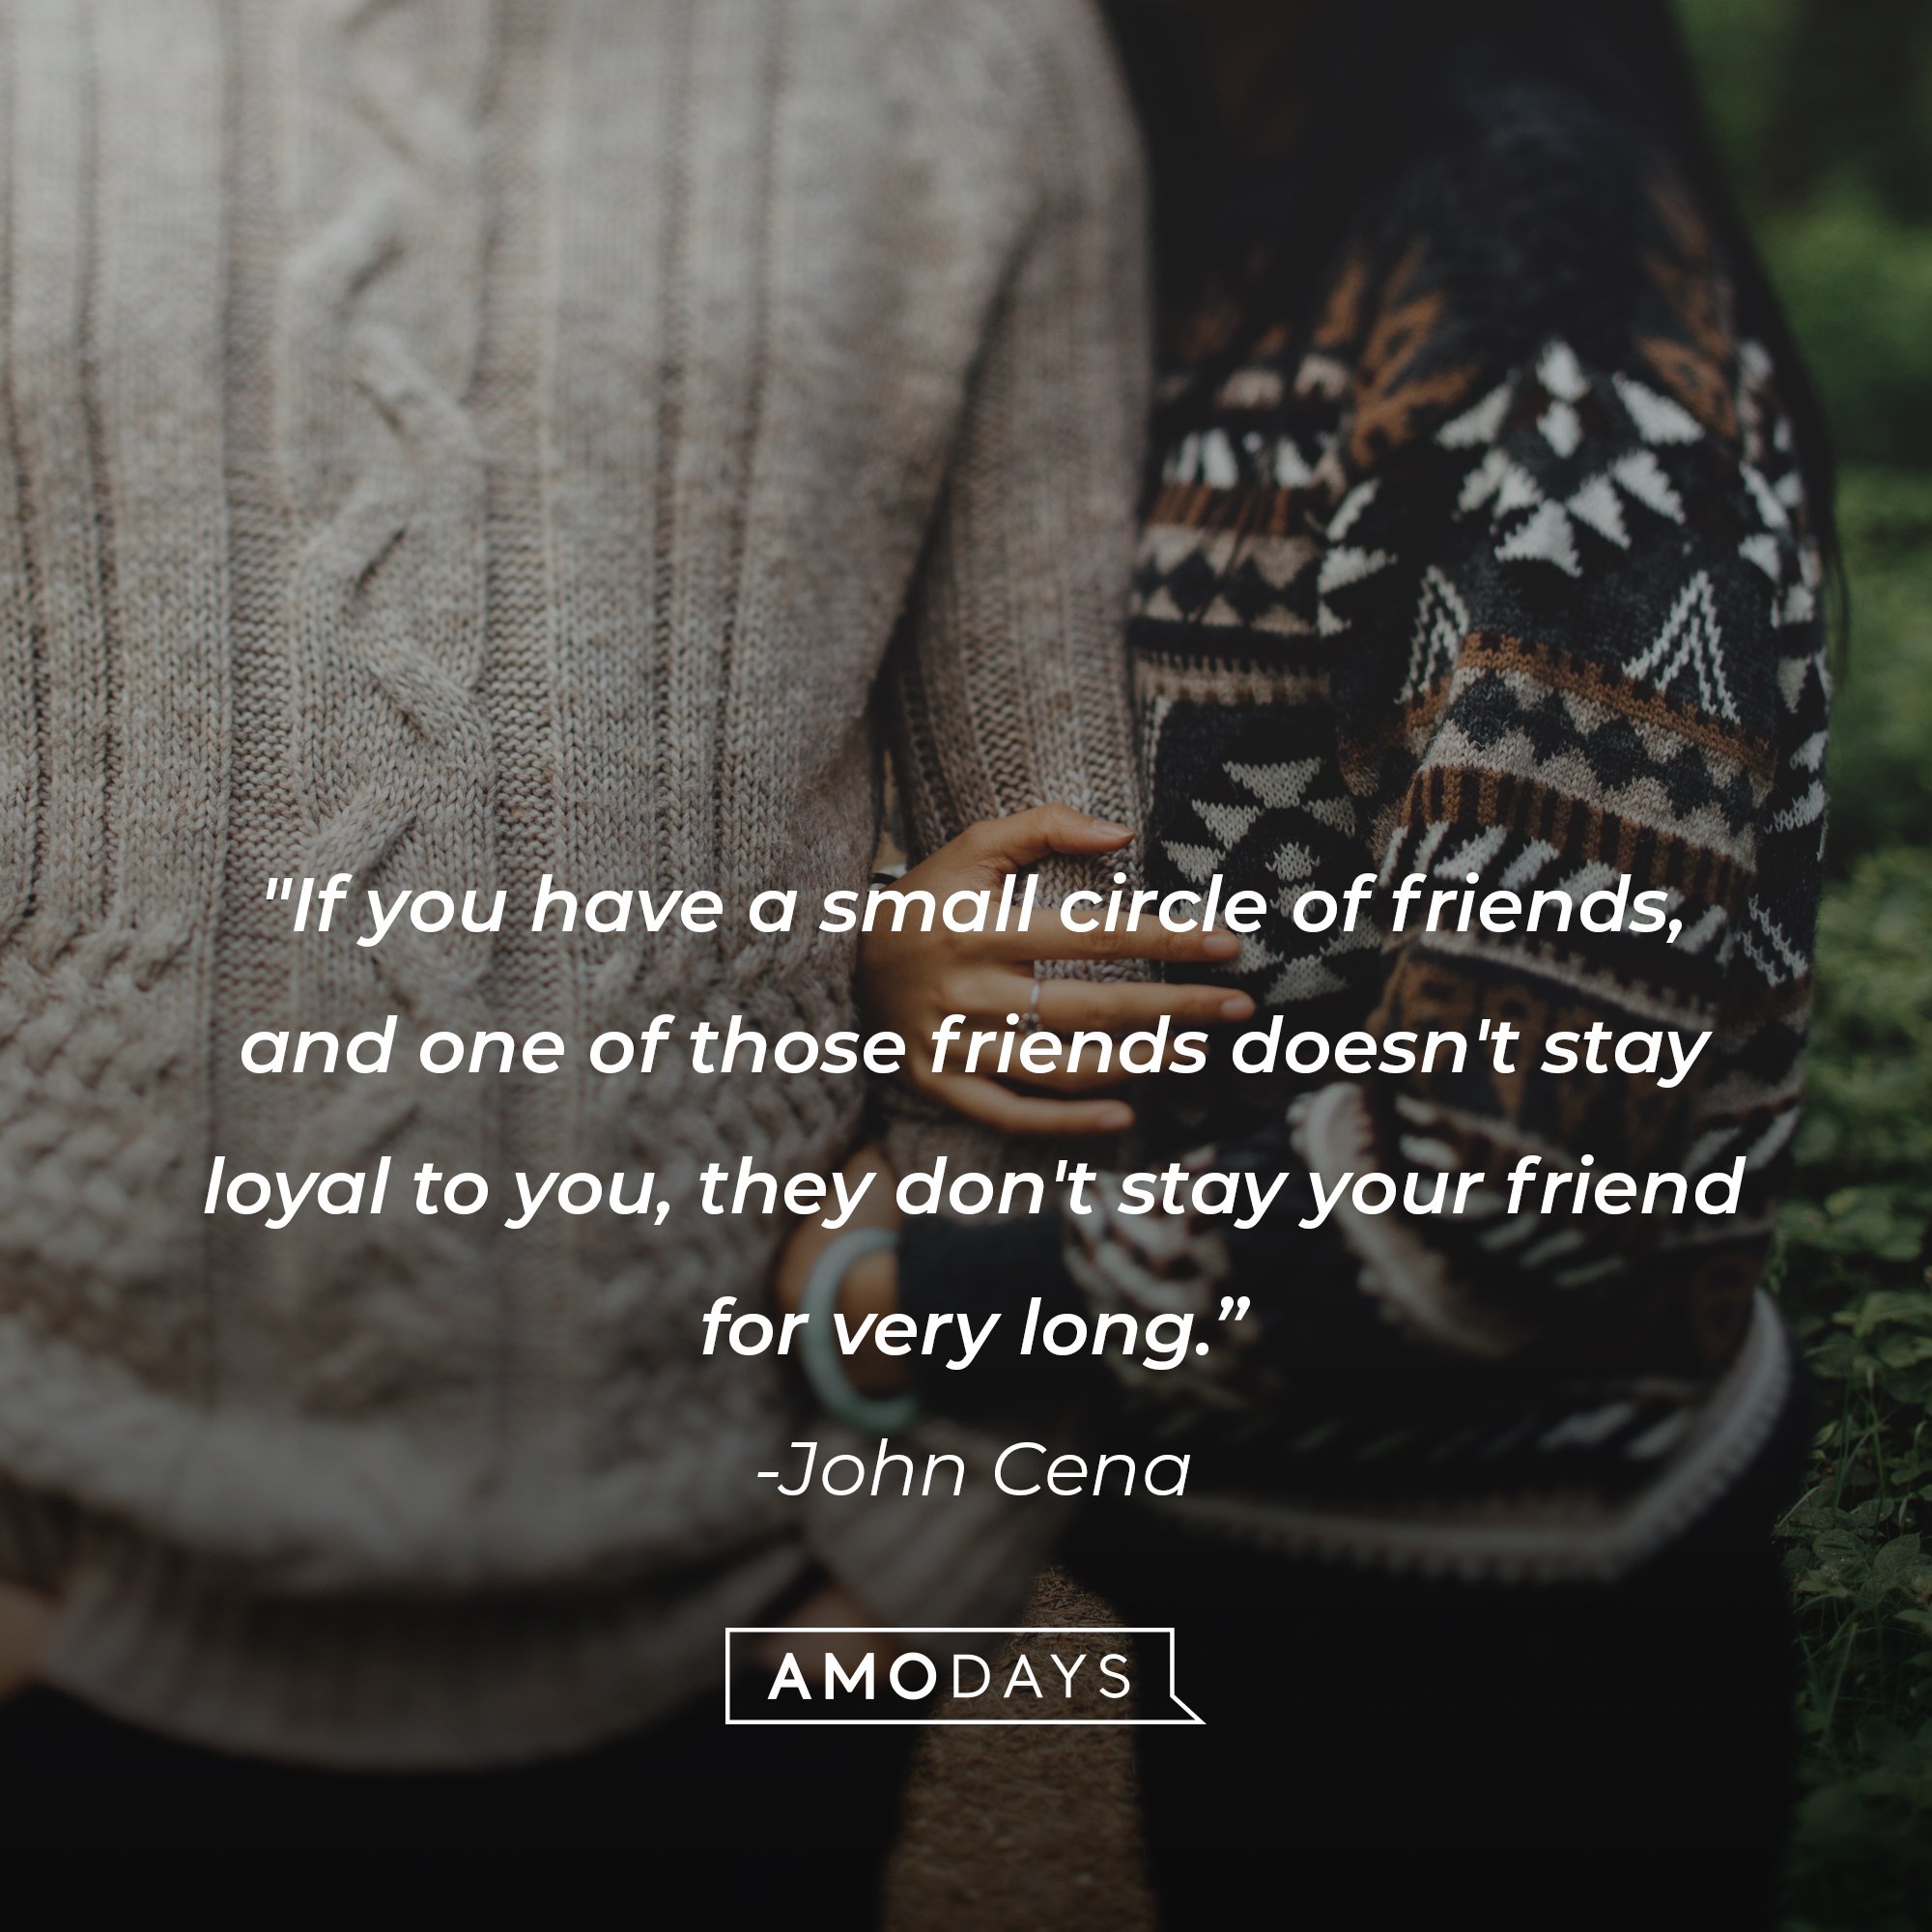 John Cena’s quote: "If you have a small circle of friends, and one of those friends doesn't stay loyal to you, they don't stay your friend for very long.” | Image: AmoDays 